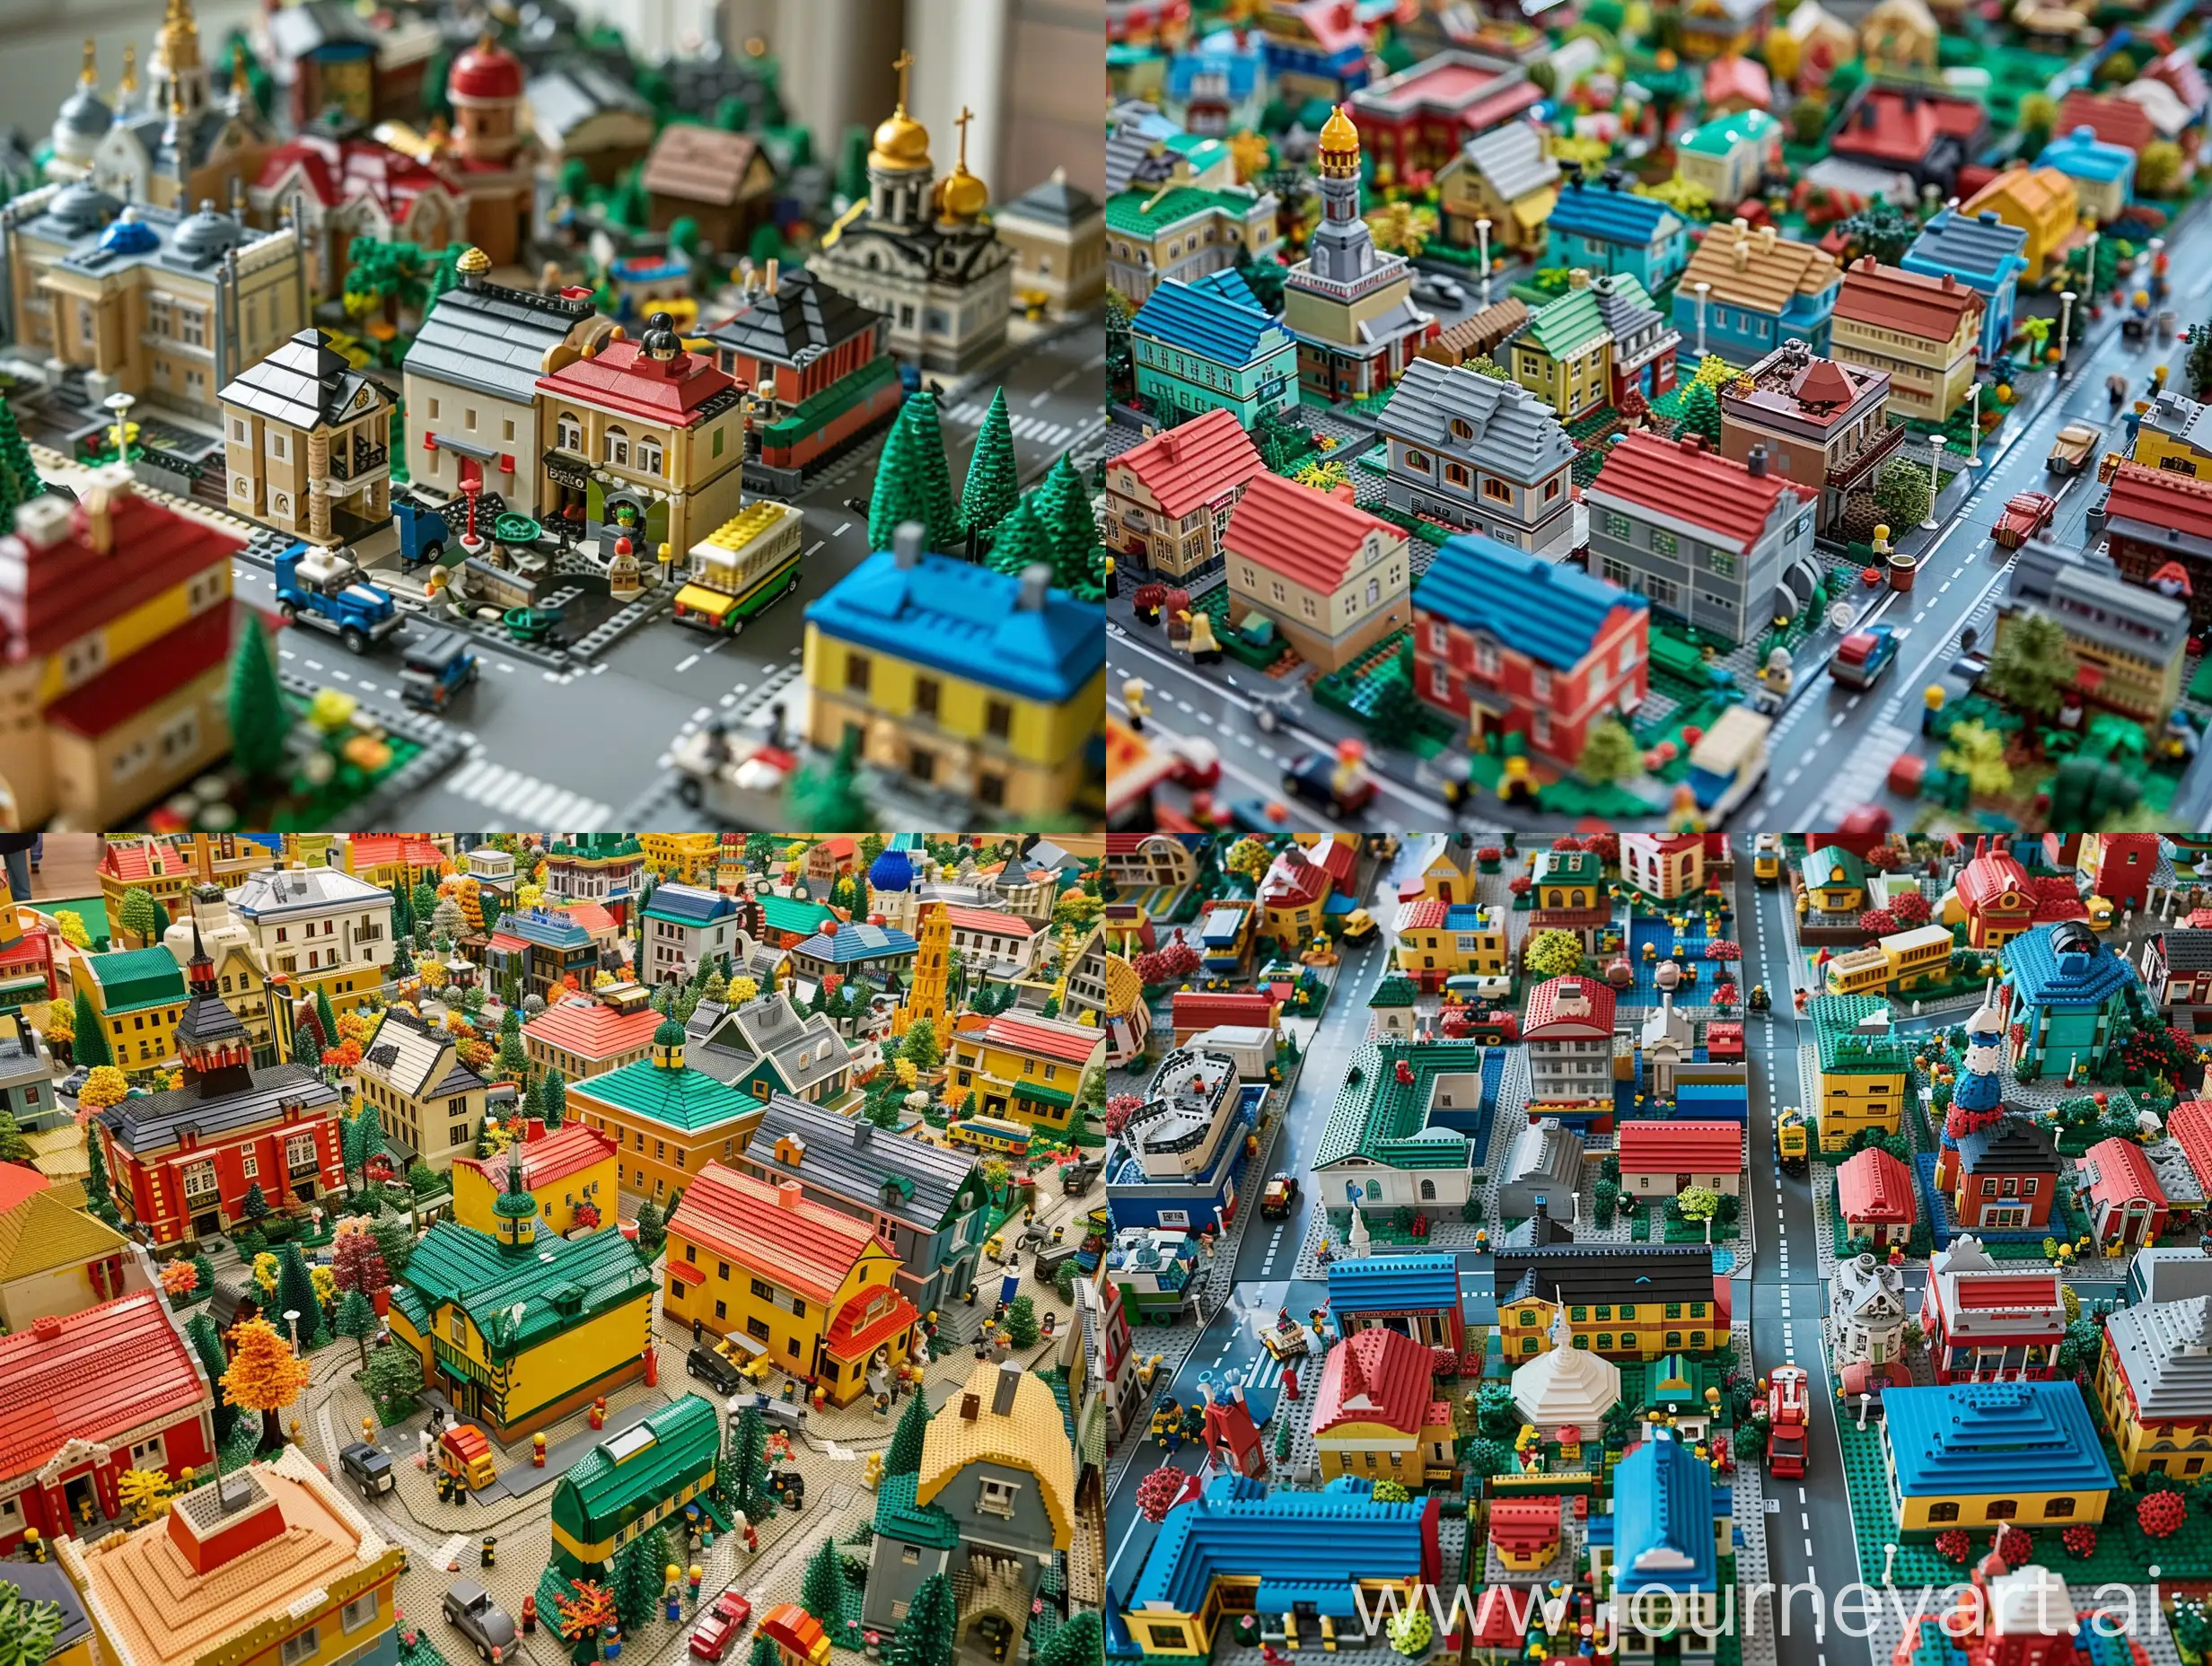 an aerial view of a Lego diorama capturing Moscow’s essence, complete with tiny houses, landmarks, vehicles, figures, in the style of intricate miniature design, colorful building blocks, modular construction, detailed city features, playful and whimsical layout --v 6.0